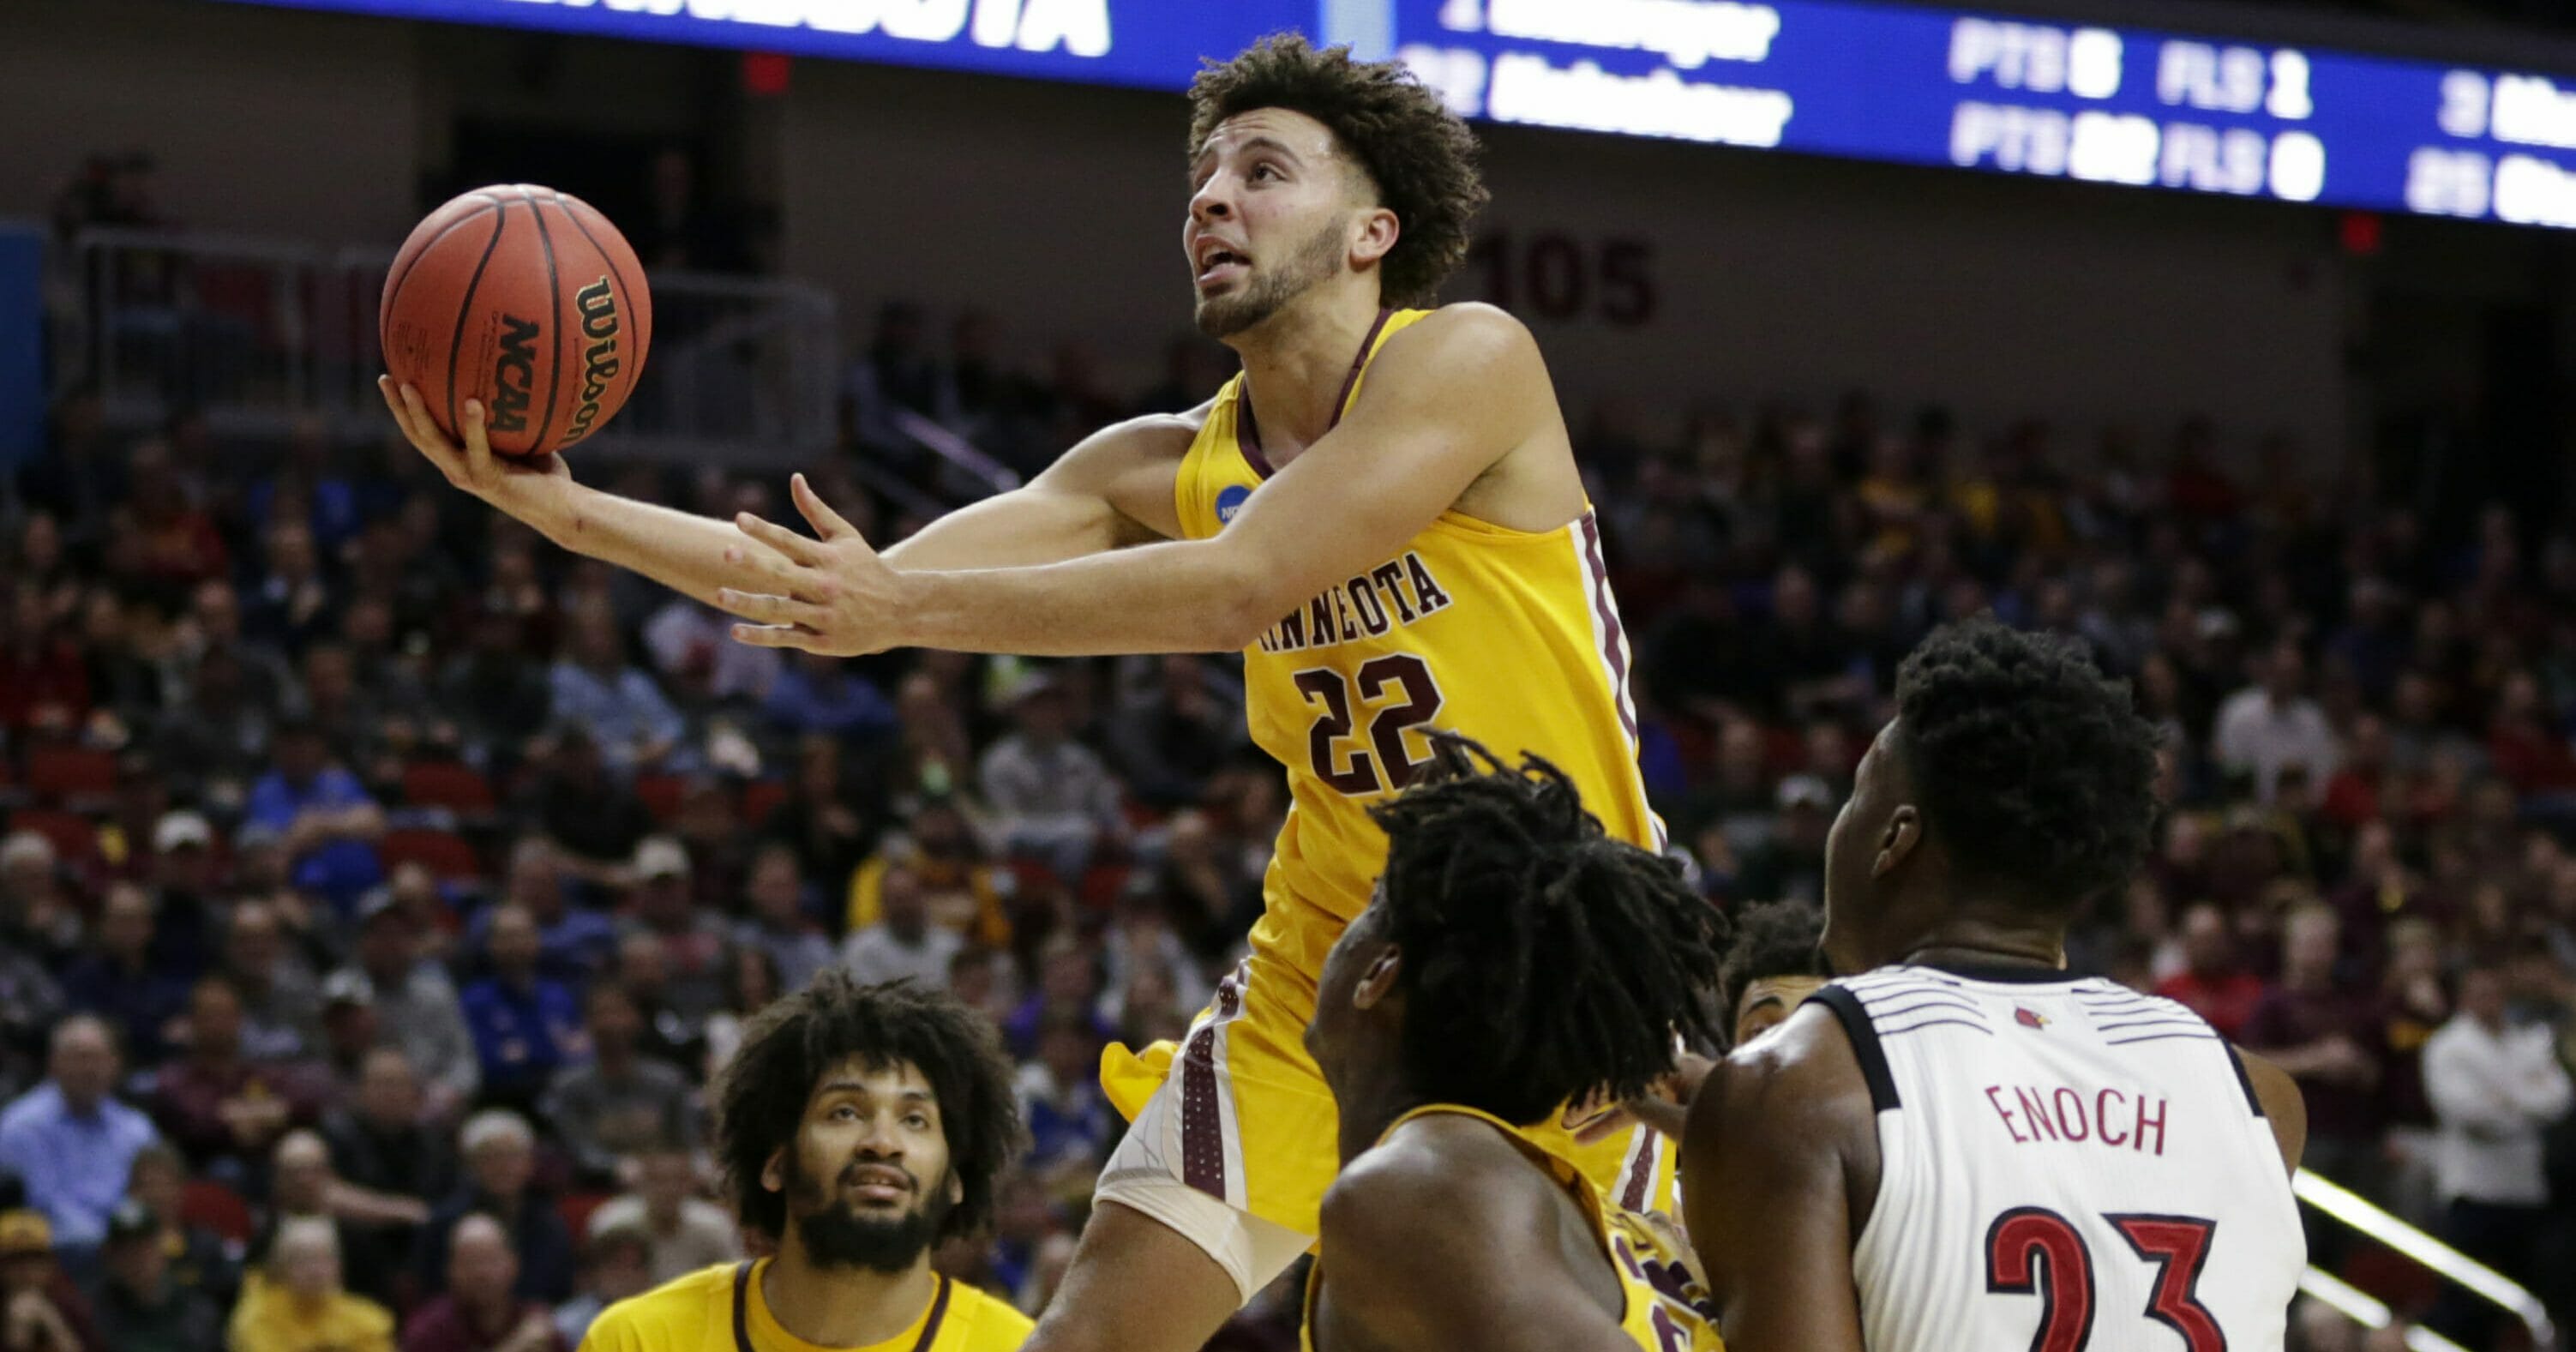 Minnesota's Gabe Kalscheur goes for a layup as Louisville's Steven Enoch watches their first-round NCAA Tournament game March 21, 2019, in Des Moines, Iowa.